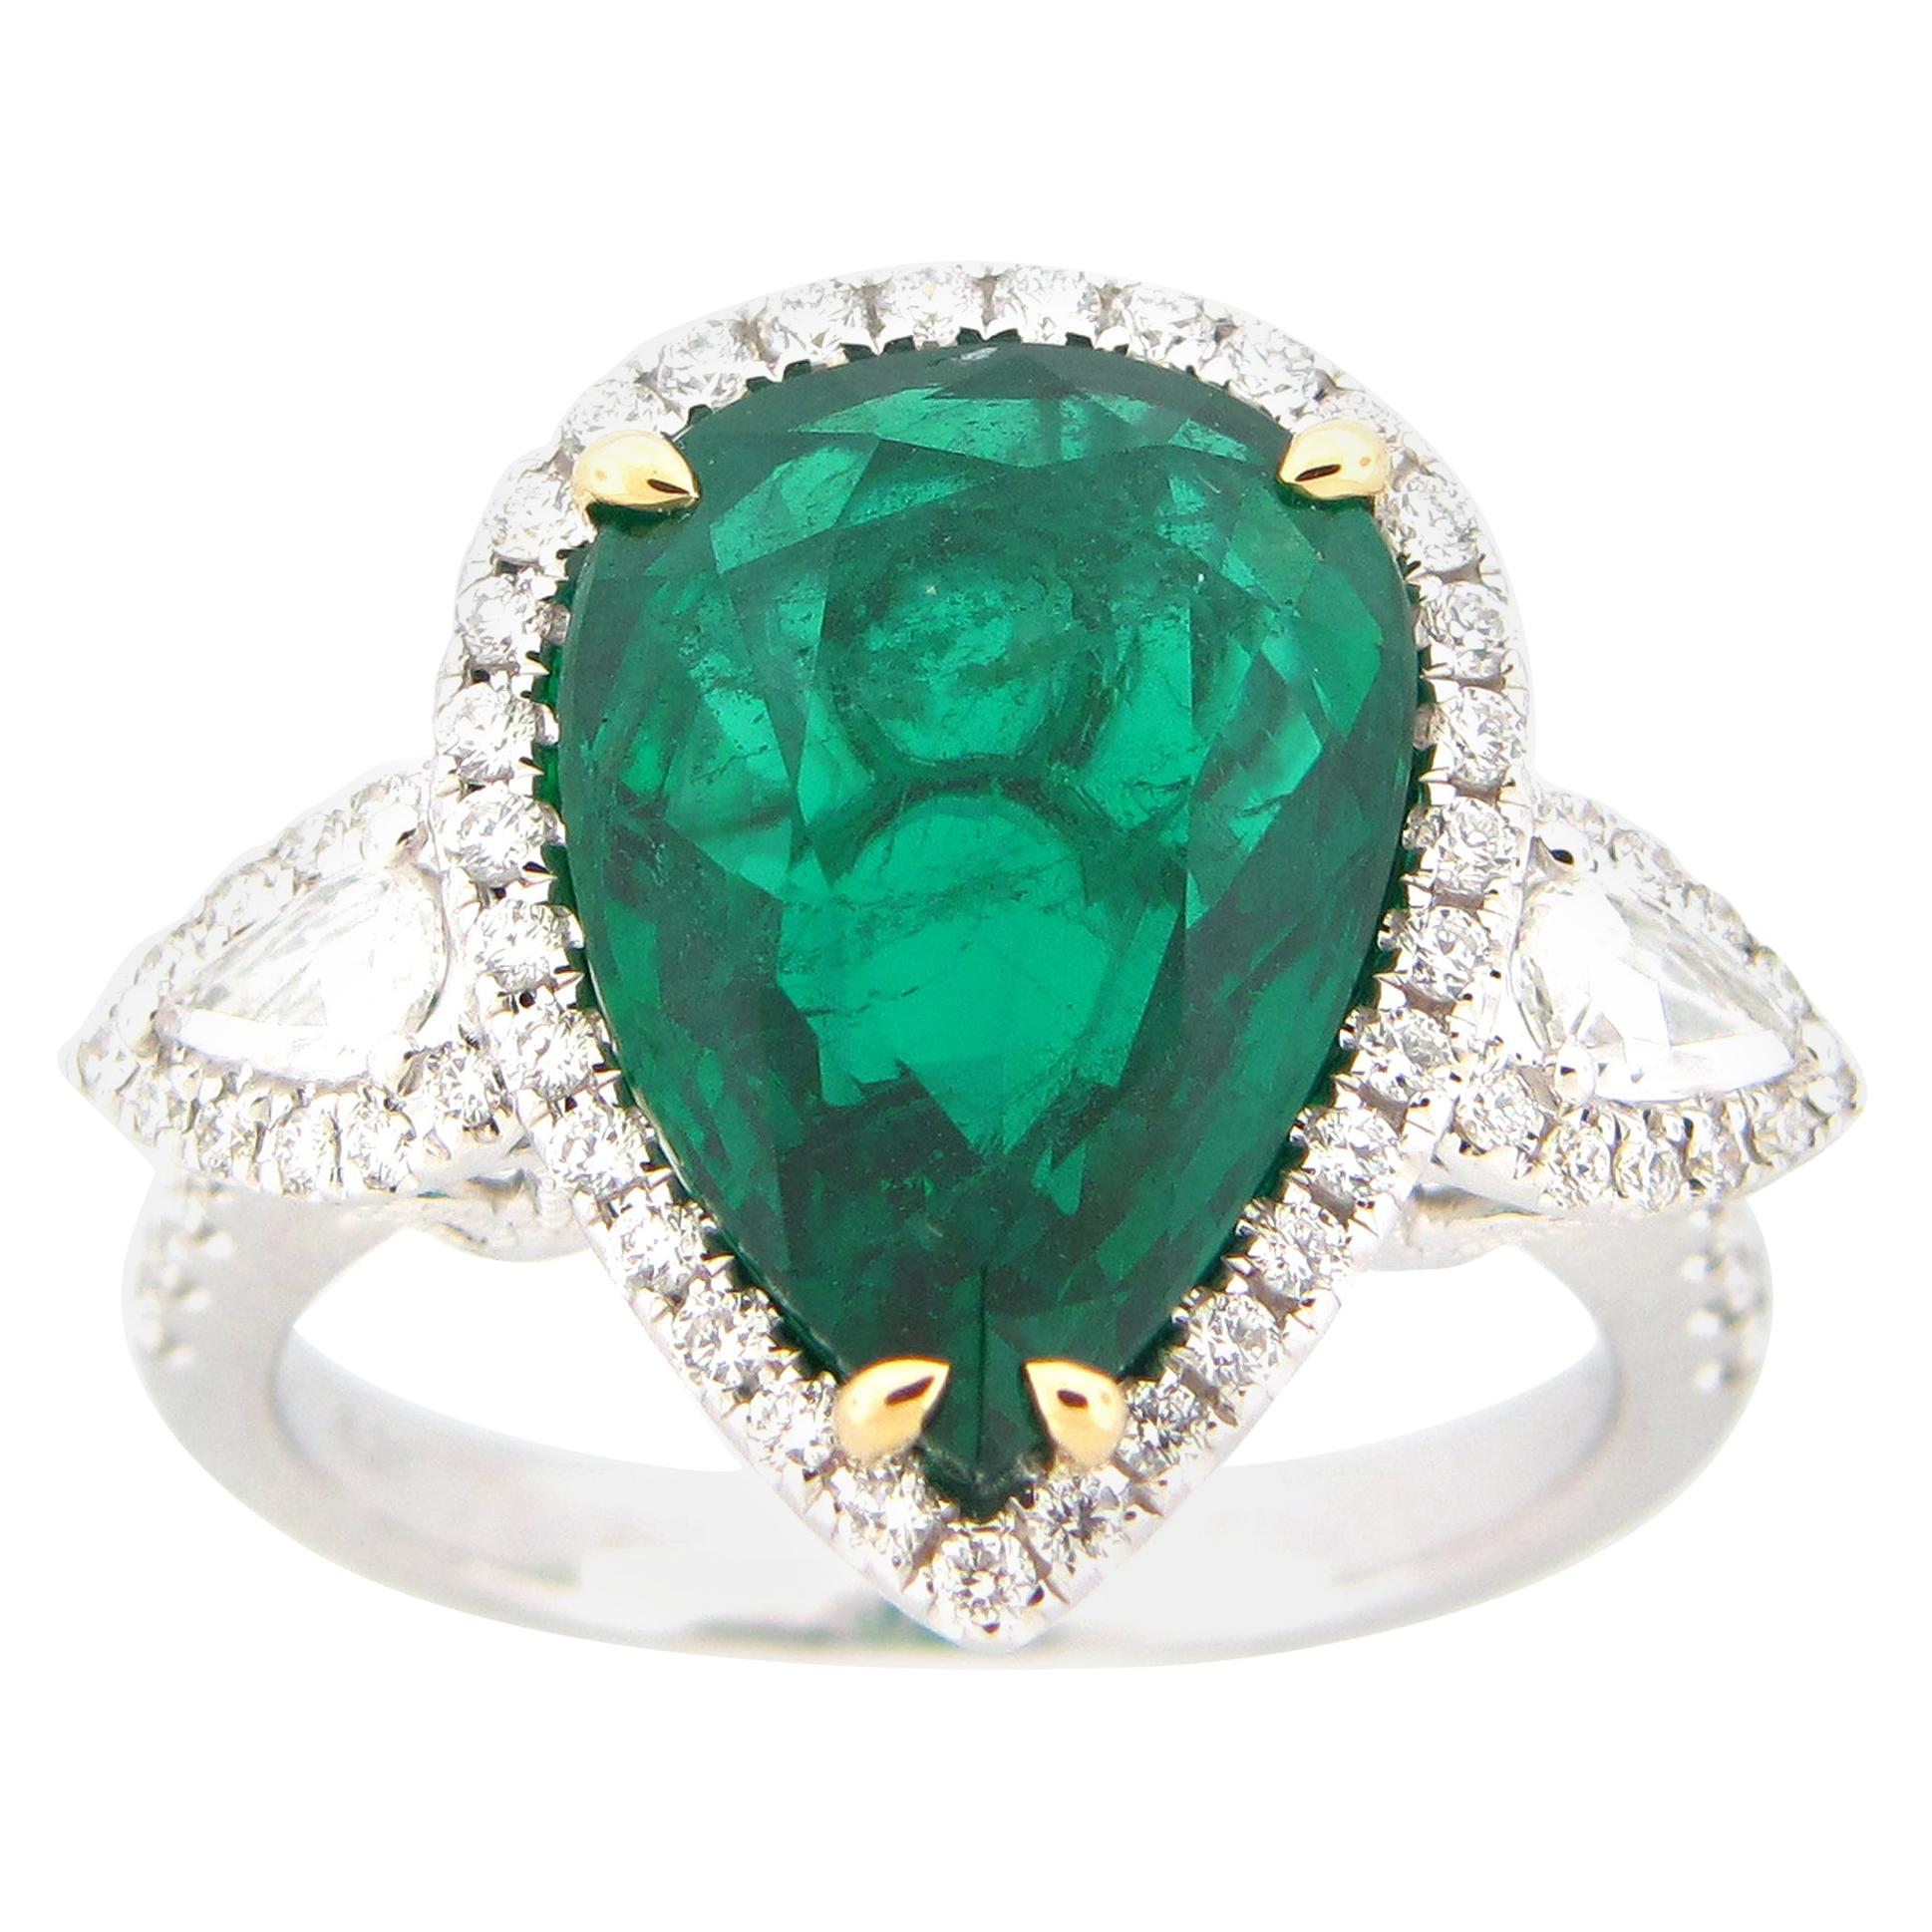 GIA Certified 6.21 Carat Pear Shape Emerald and Diamond Ring